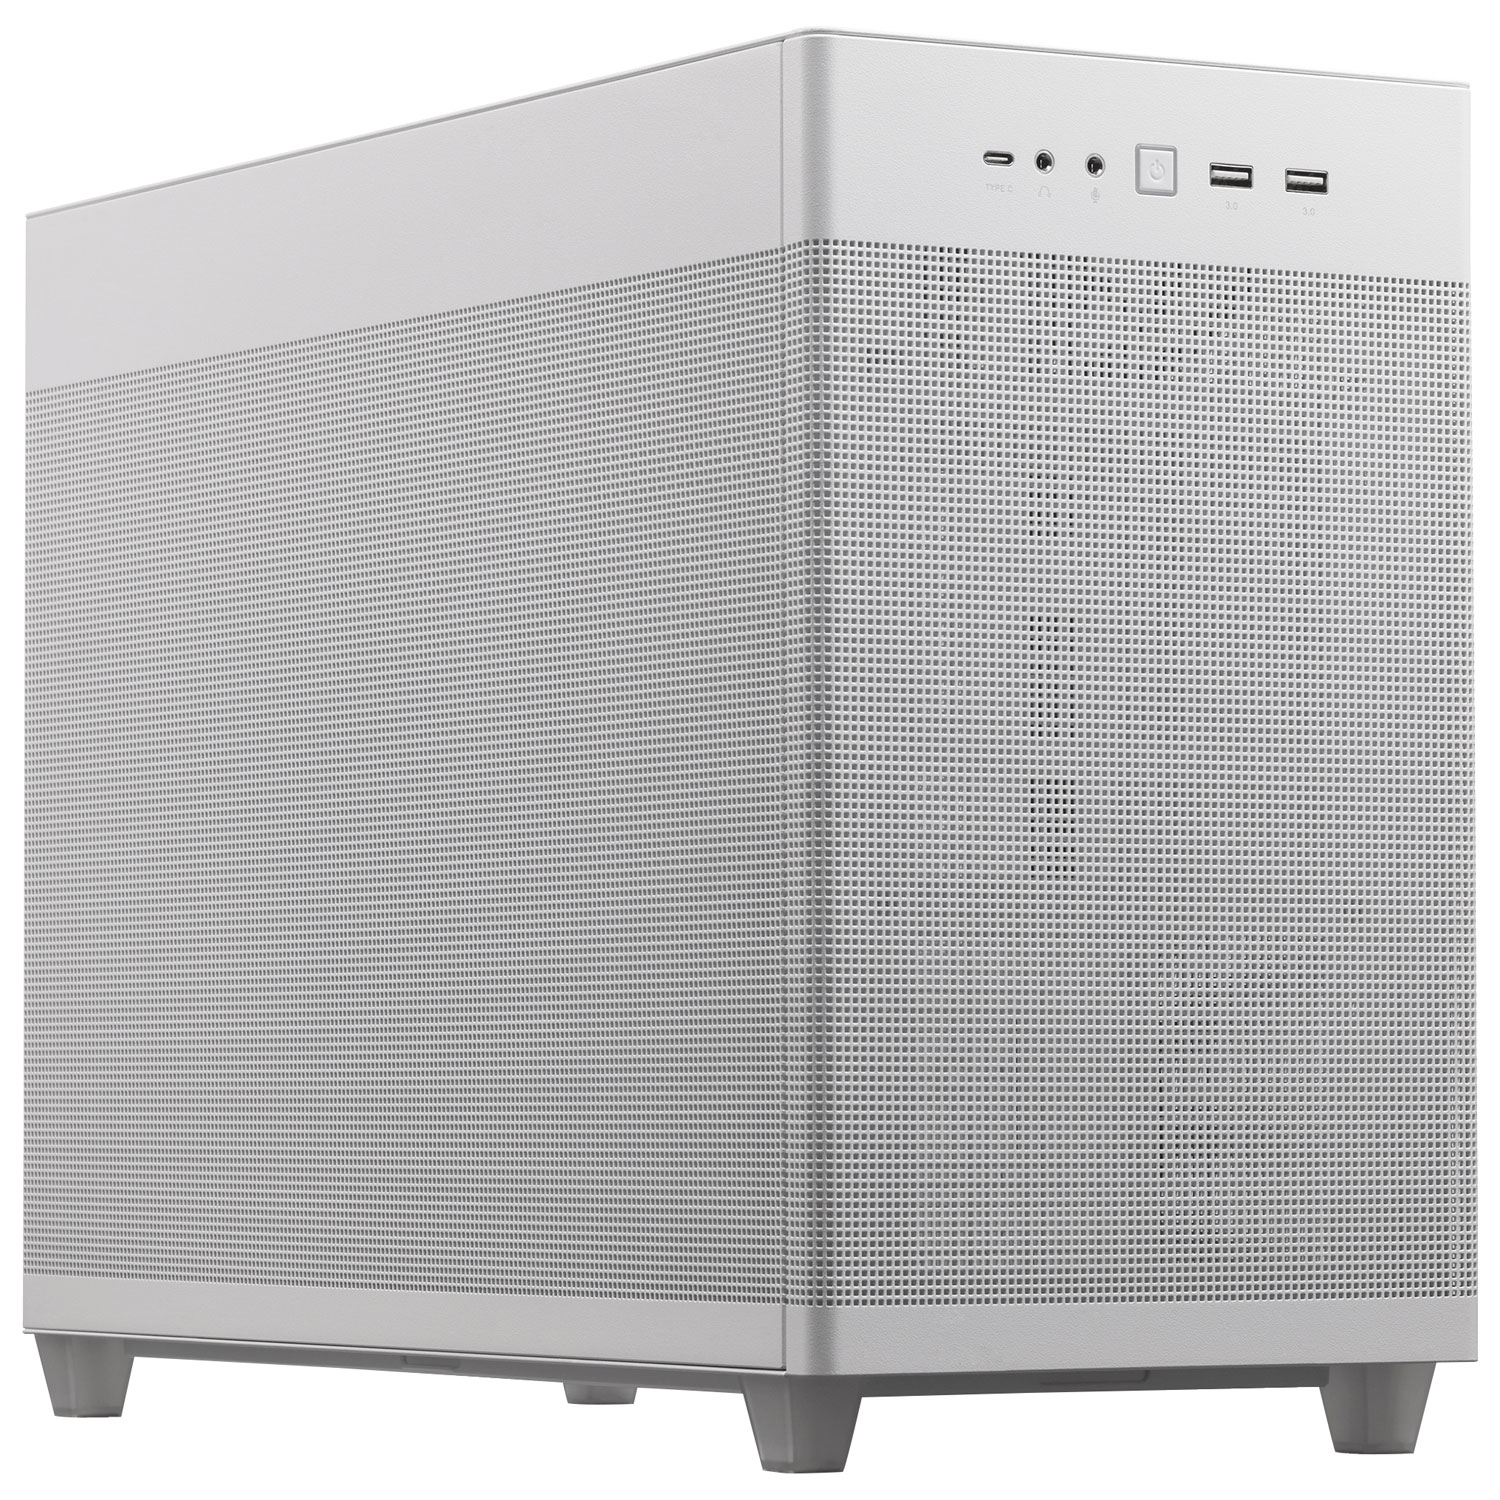 ASUS Prime AP201 Mid-Tower ATX Computer Case - White